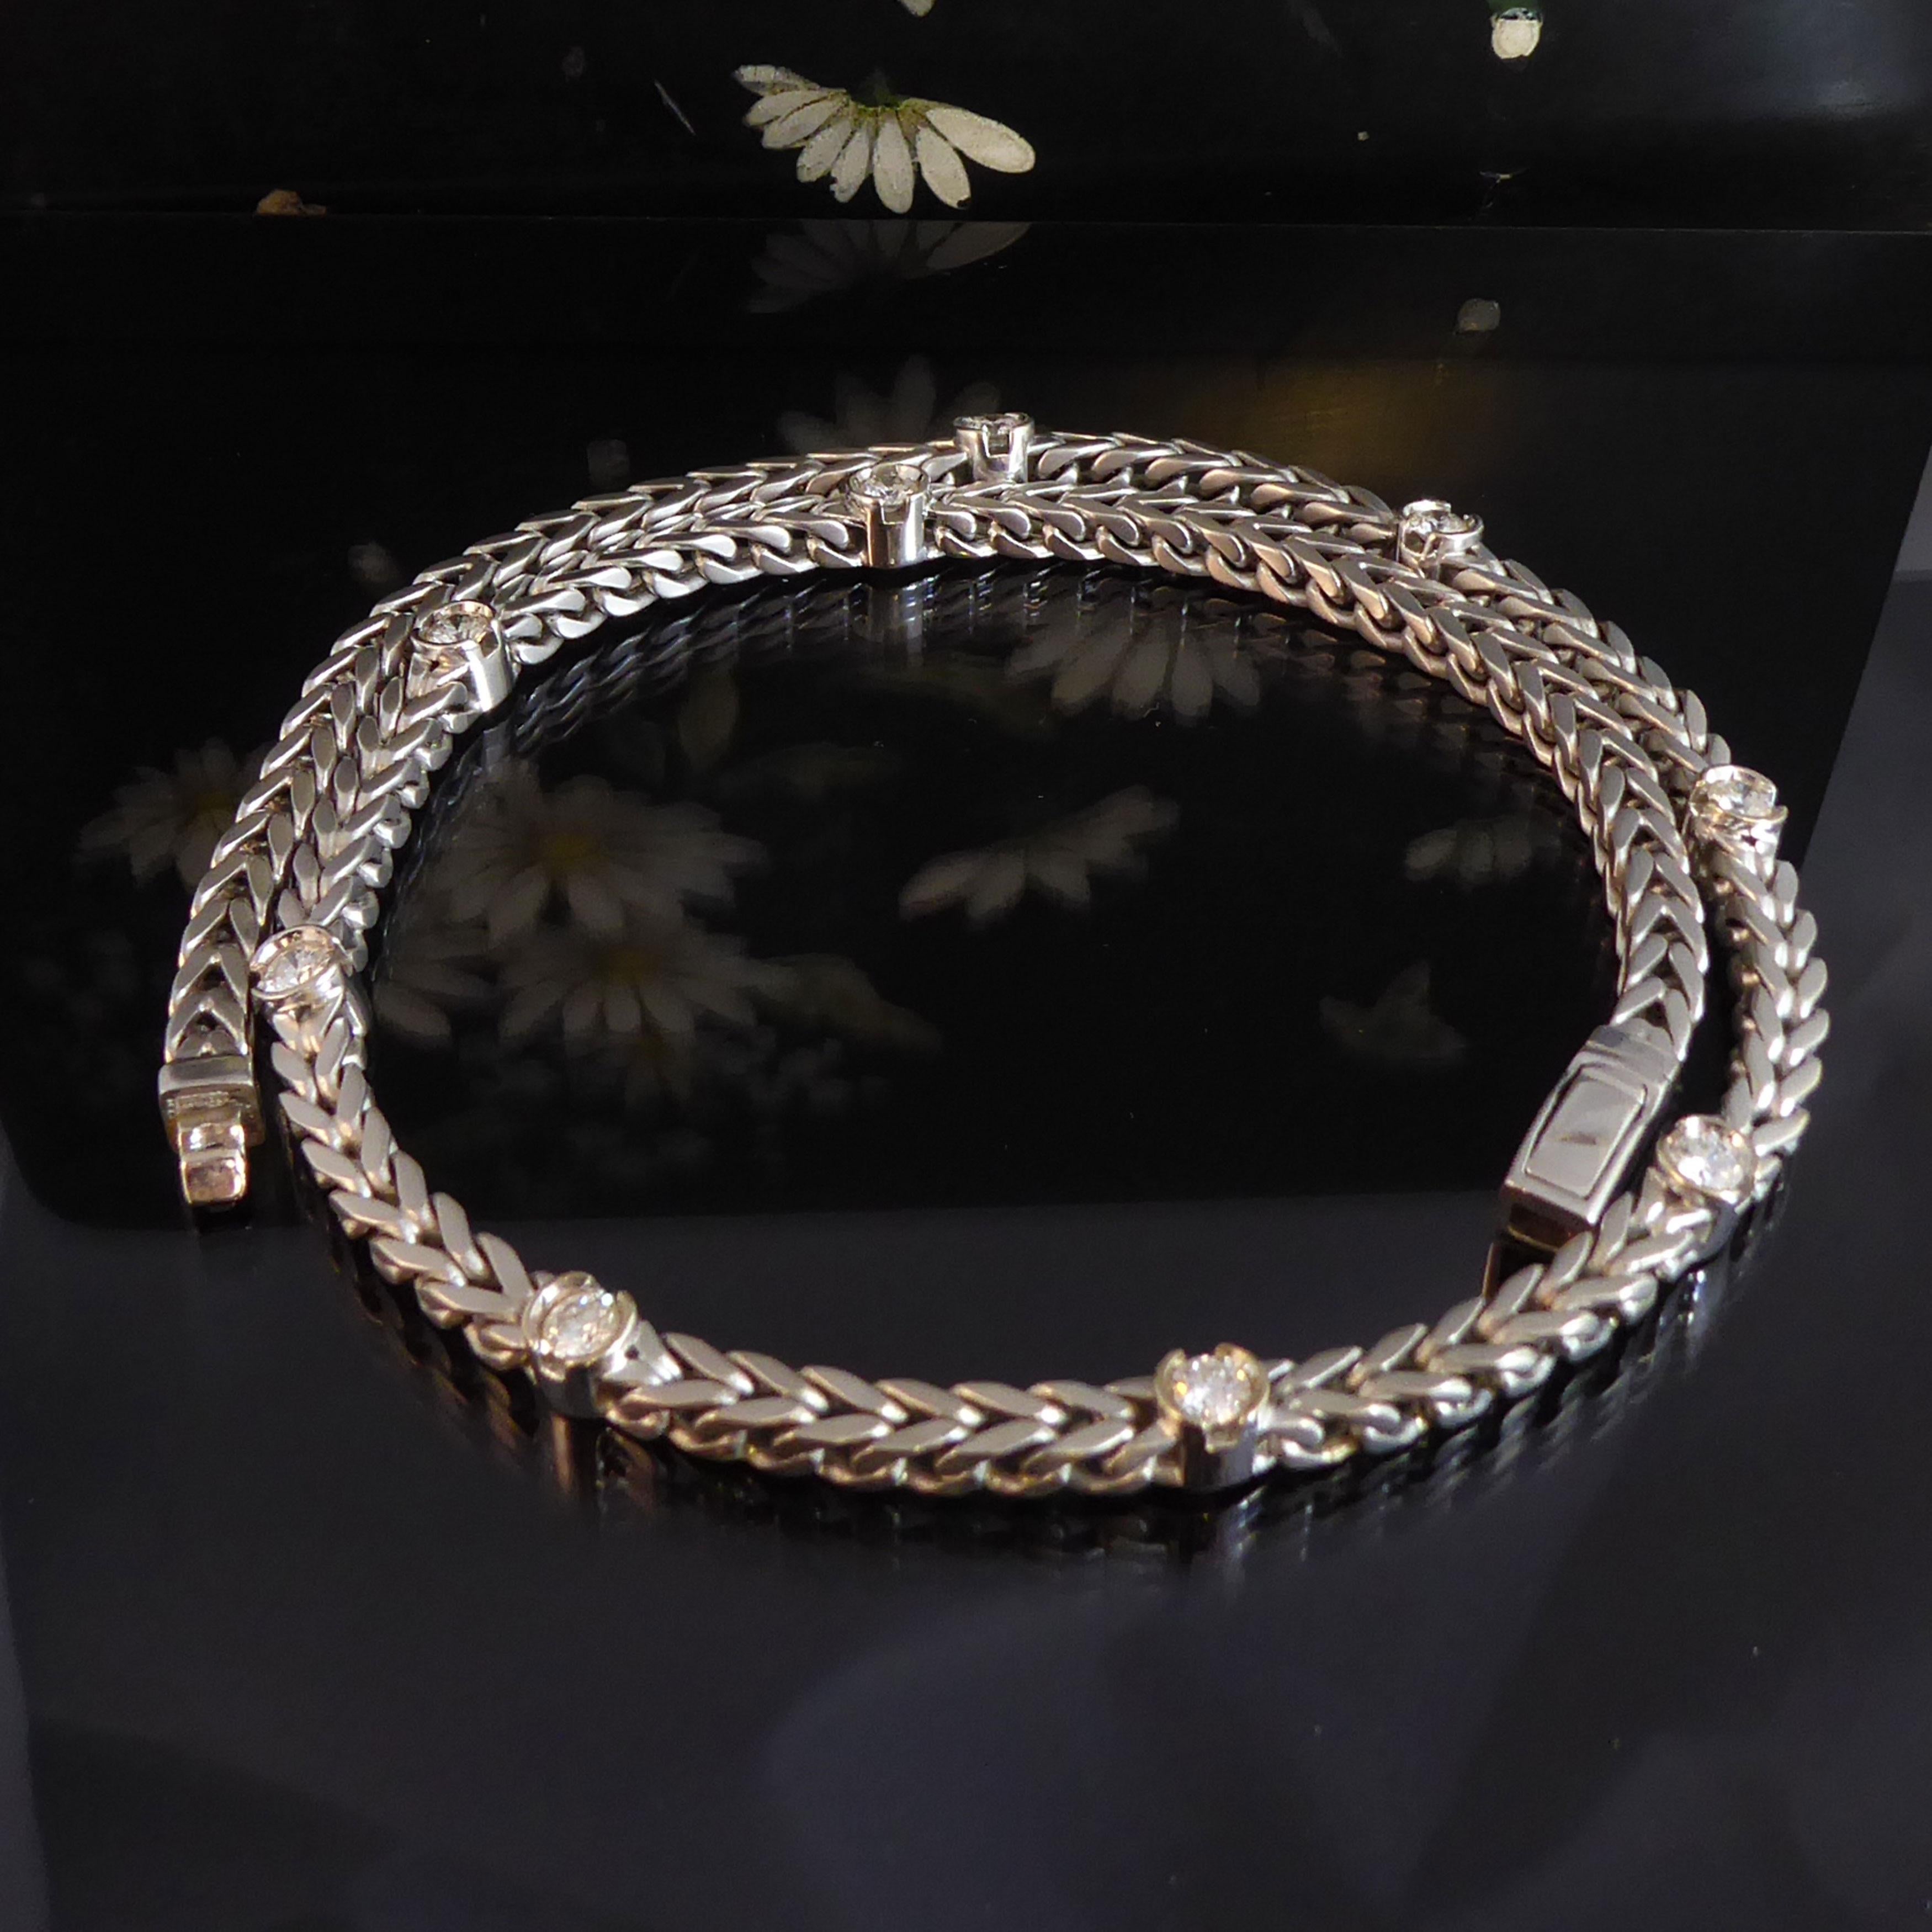 Contemporary 2.25 Carat Diamond Collar Necklace, White Gold Franco Link Chain, Pre-Owned